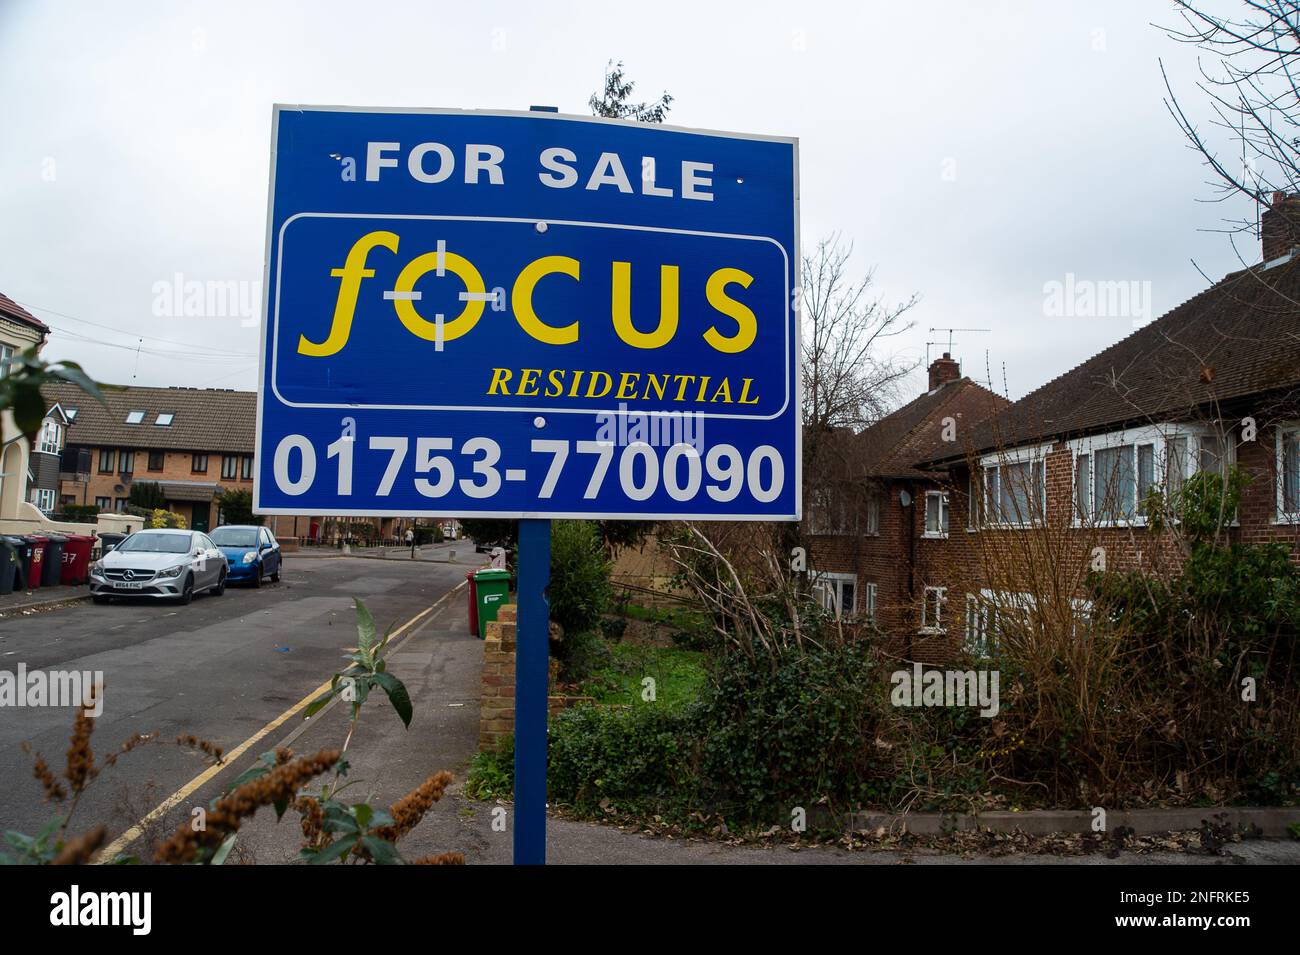 Slough, Berkshire, UK. 17th February, 2023. A For Sale Sign outside a block of maisonettes in Slough Town Centre, Berkshire. It has been reported in the press today that UK house prices could fall by as much as 40%. The number of buyers is begining to dry up as people are concerned about buying homes if the prices are to fall, whereas meanwhile, those selling properties don't want to reduce the price. Experts are predicting house prices could take a massive fall as they did in the 1990s when many people found themselves in a negative equity situation. Credit: Maureen McLean/Alamy Live News Stock Photo